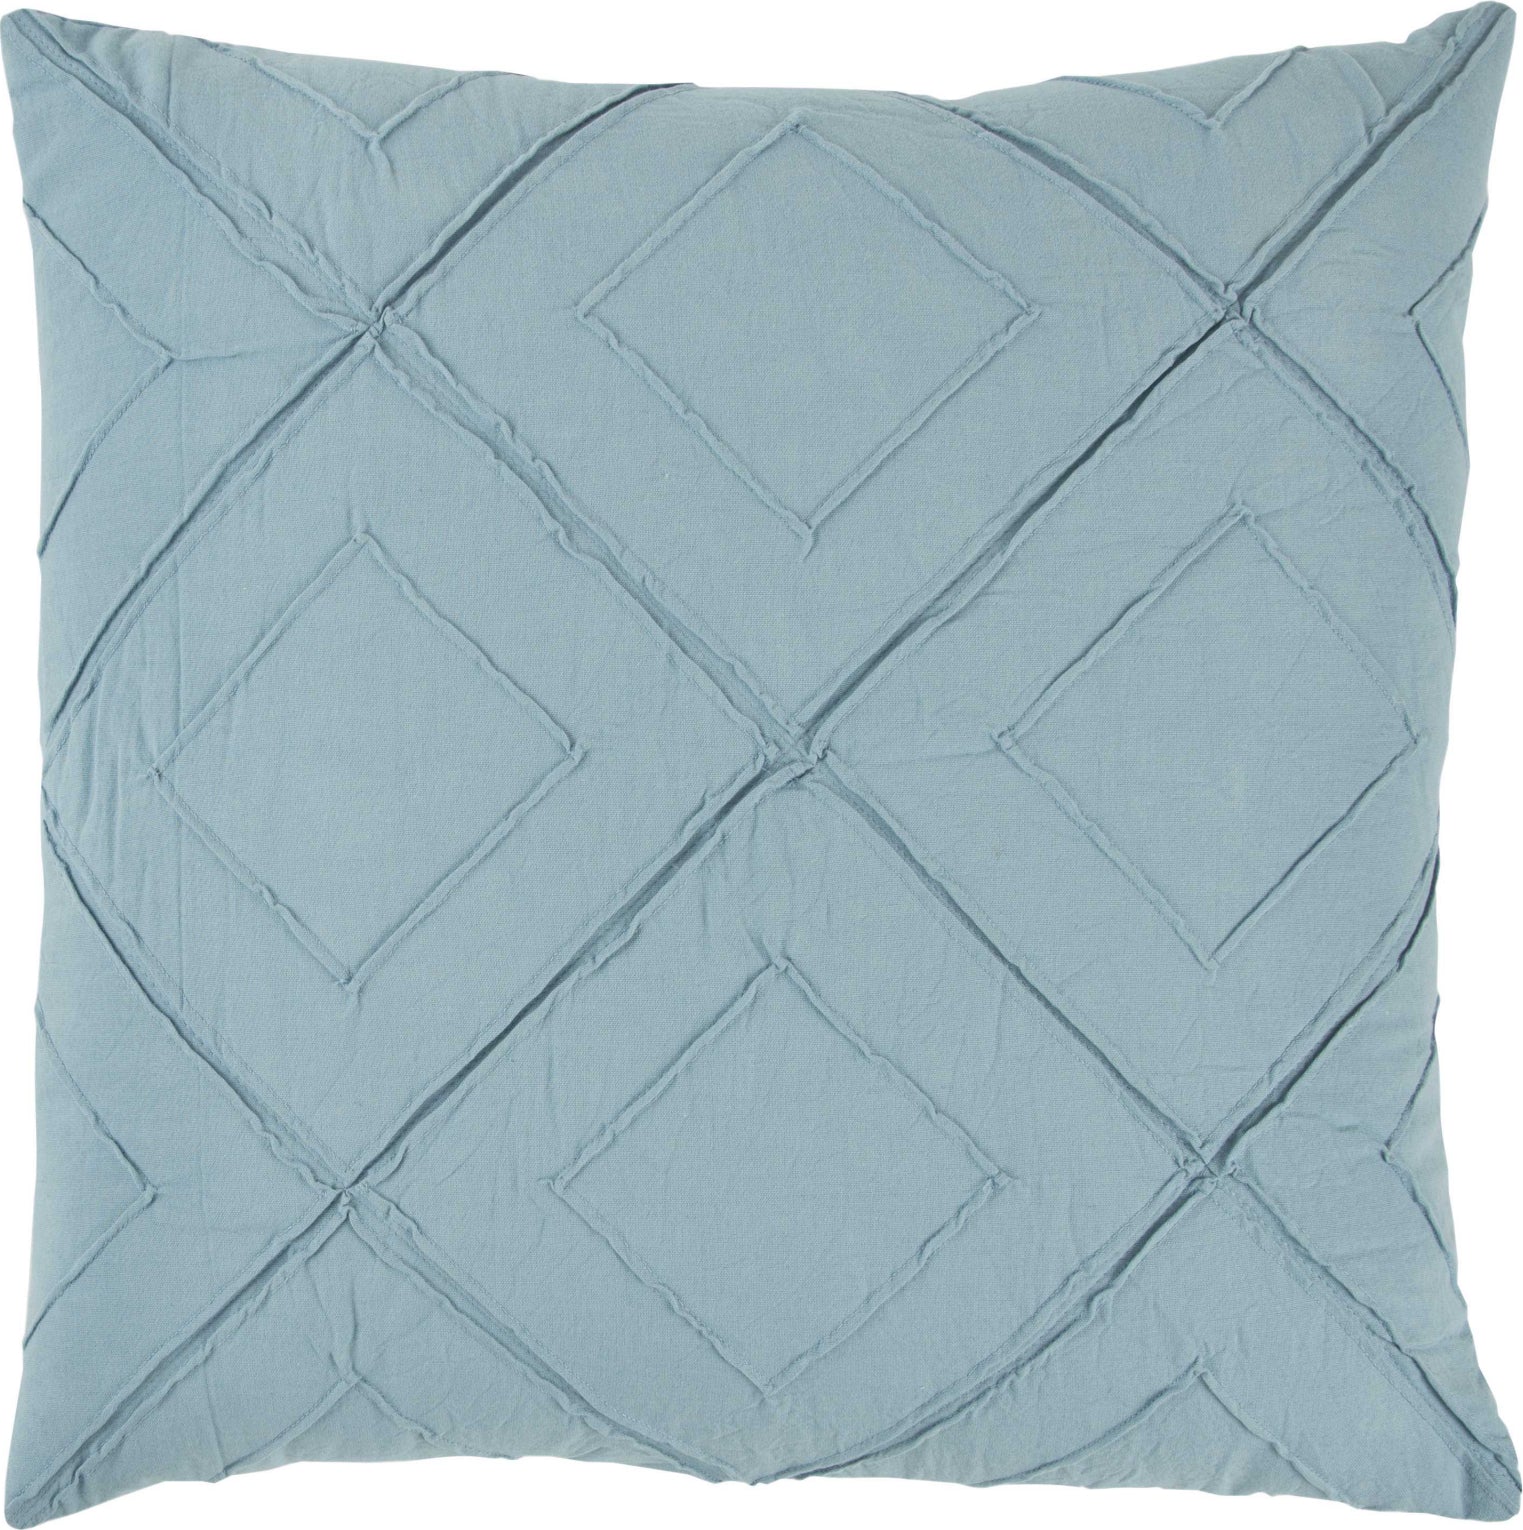 Rizzy Pillows T13258 Turquoise